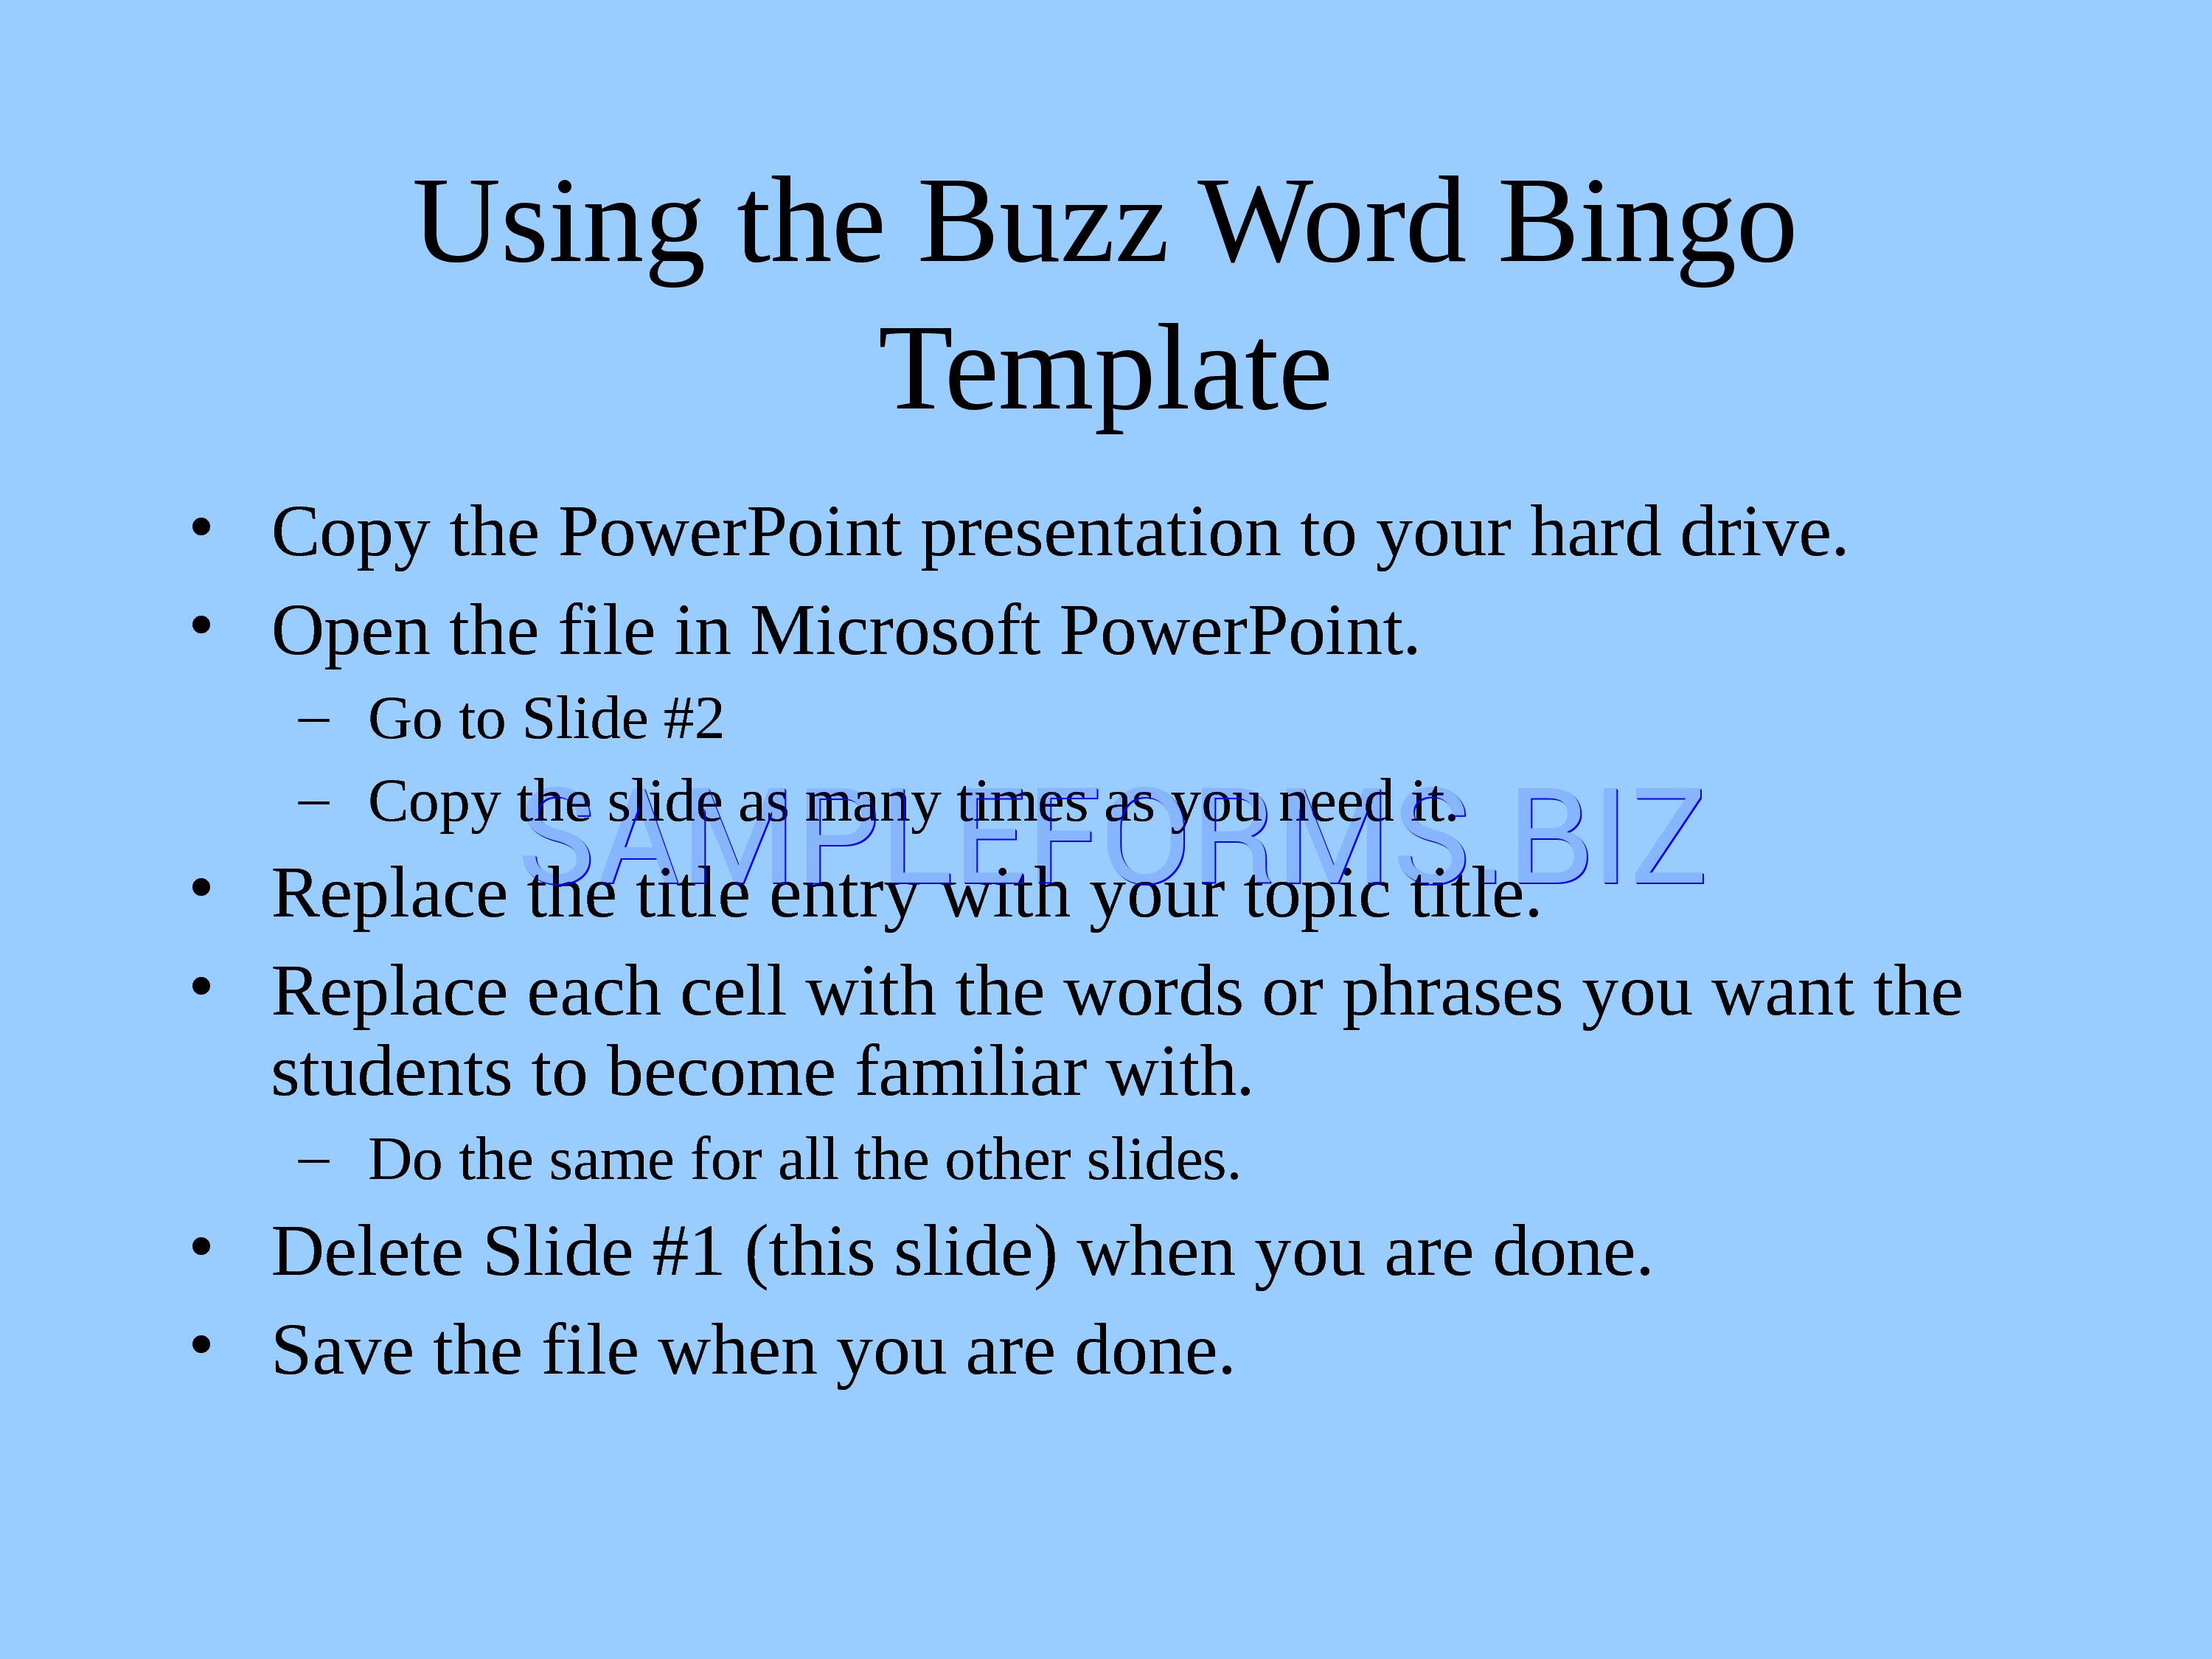 Preview free downloadable Buzz Word Bingo Game Template in PDF (page 1)